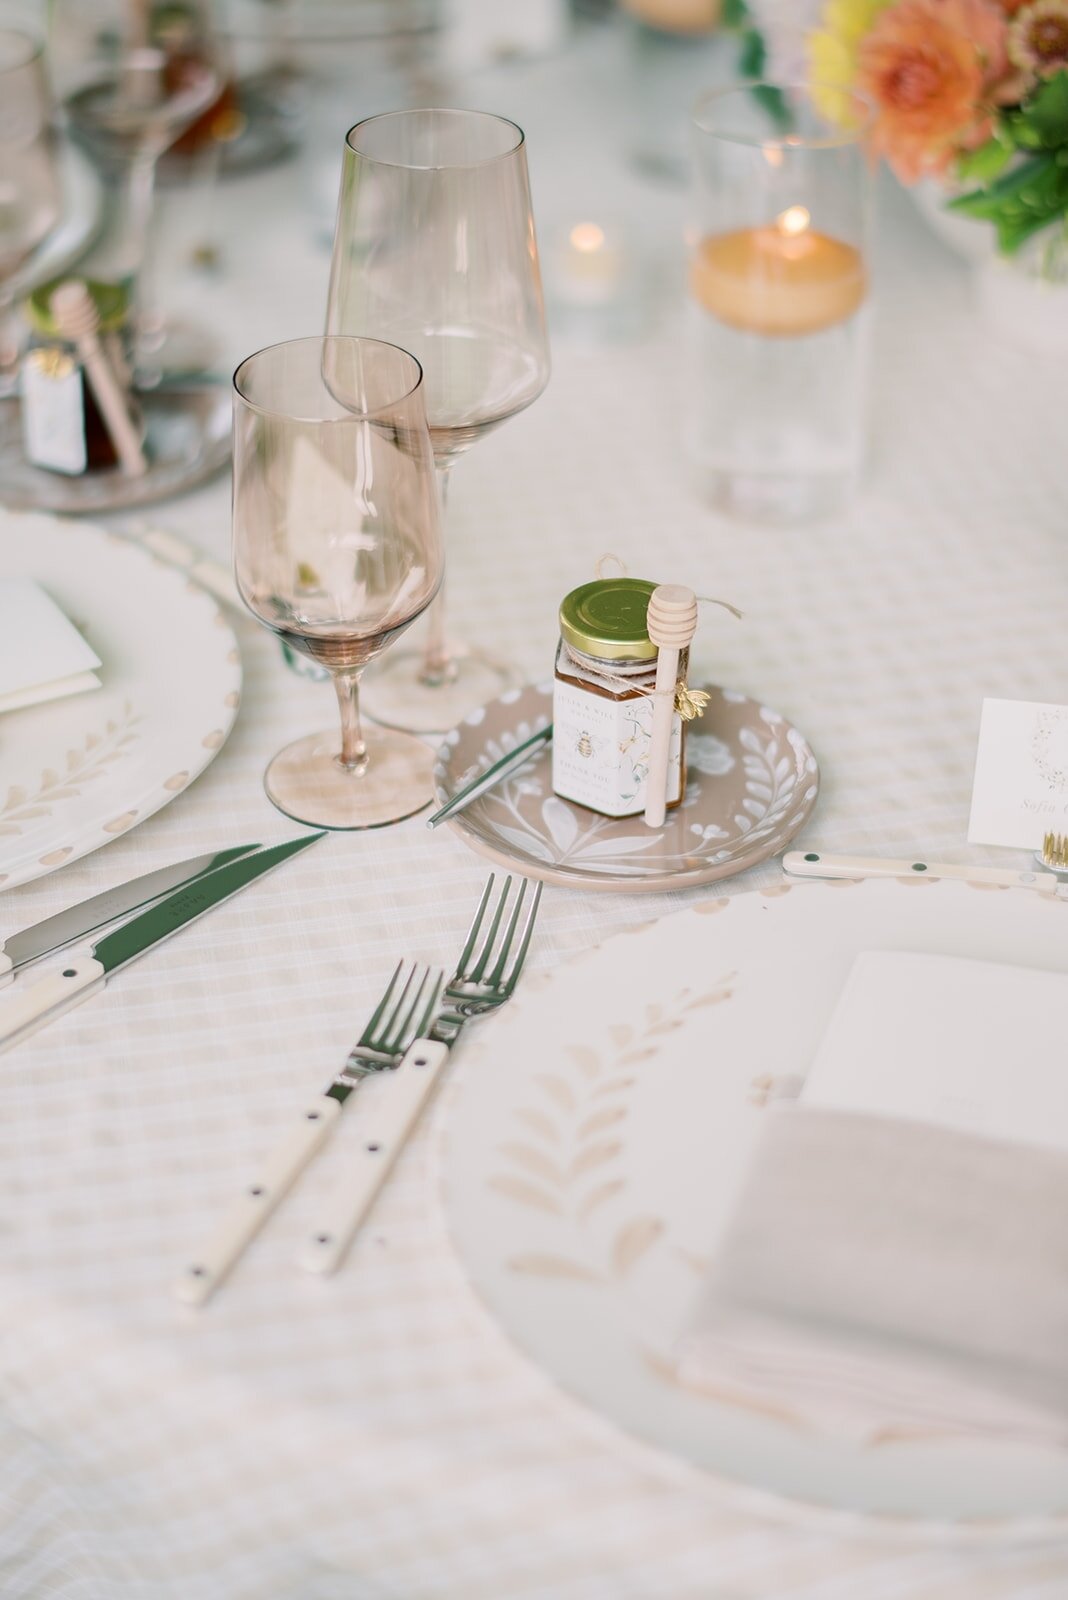 Those tabletop details that need nothing more than a sentence about how beautiful they are. 

@simplybeautifuldecor
@kaylapotterphoto
@kendon.design.co
@guelphtents
@swaybar
@statuerue
@treadwellcaters
@treadwellresto
.
.
.
 #WeddingCatering  #Weddin